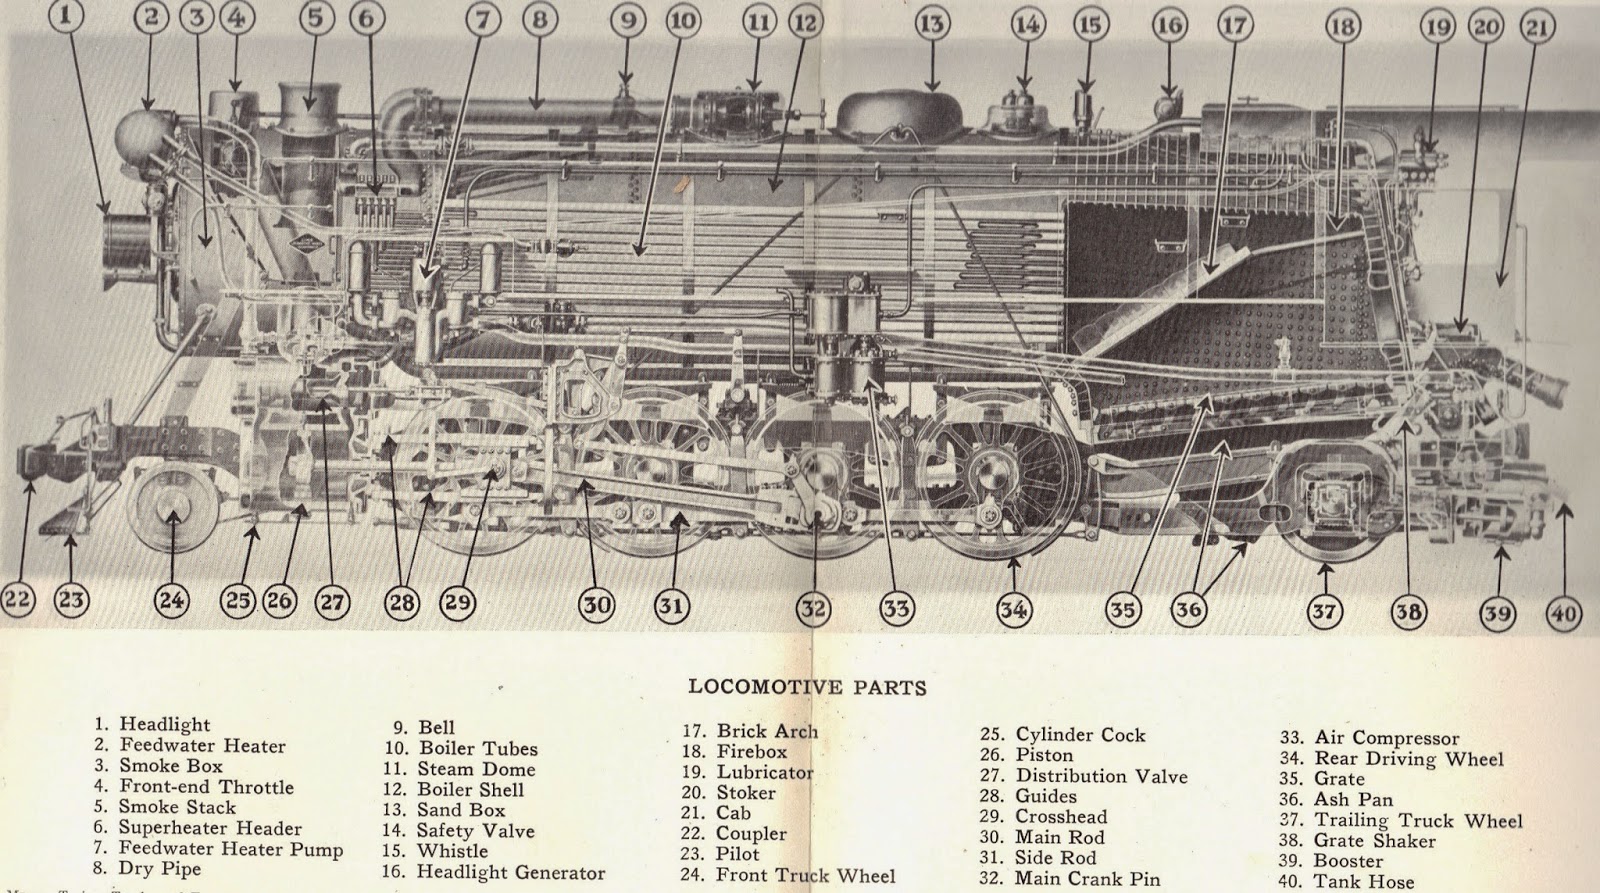 Railway Preservation News • View topic - Need Help Finding Steam Locomotive Numbered Parts Diagrams